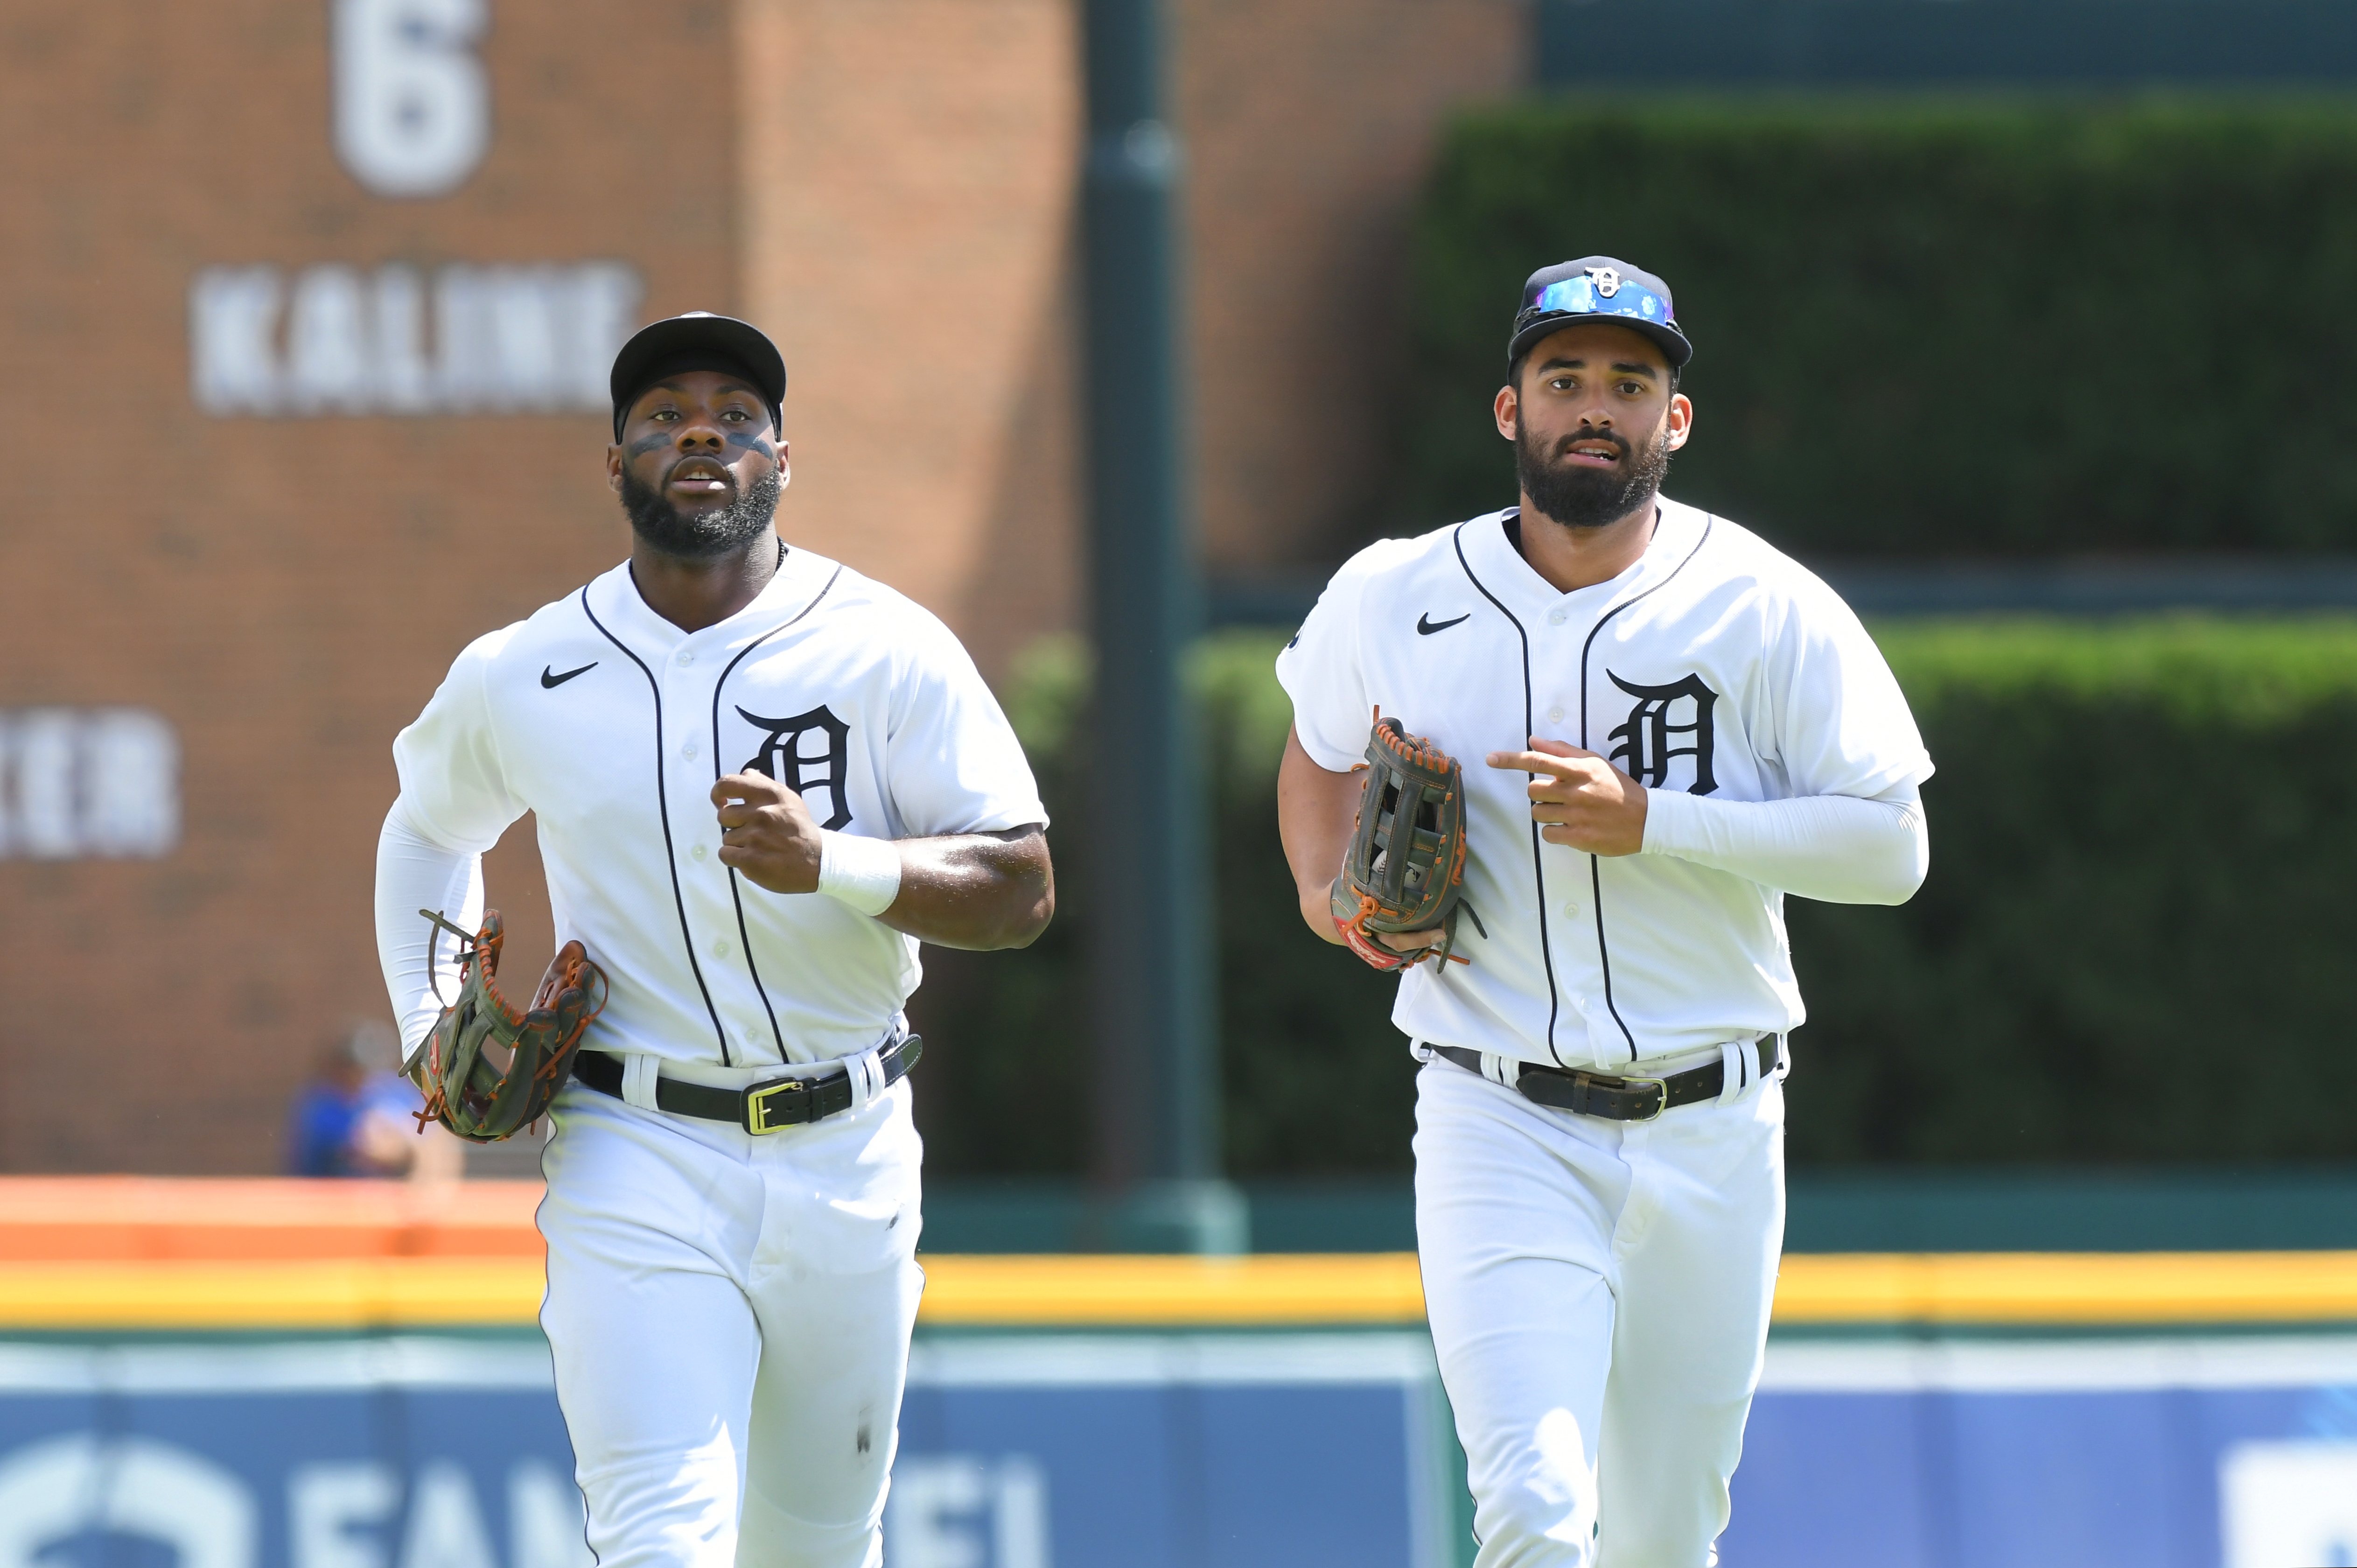 Detroit Tigers quietly still in playoff race with injured stars